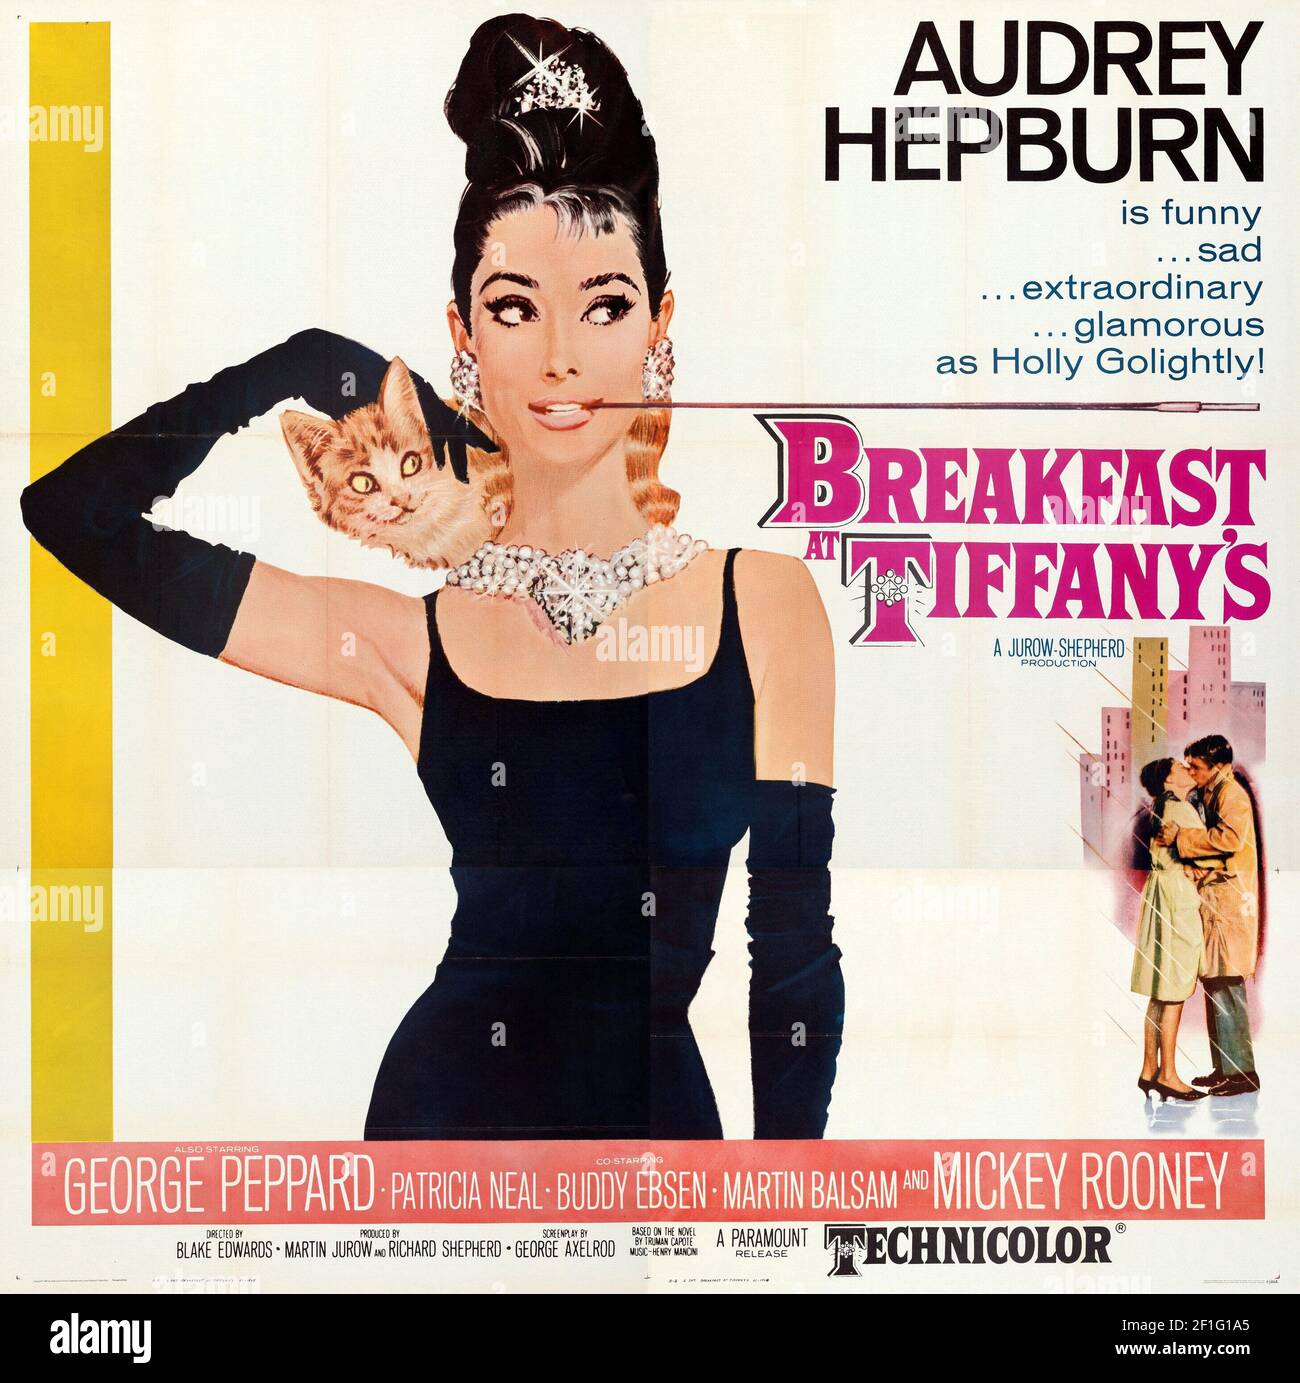 Breakfast at Tiffany's is a 1961 American romantic comedy film directed by Blake Edwards. Feat. Audrey Hepburn, George Peppard, Mickey Rooney. Stock Photo